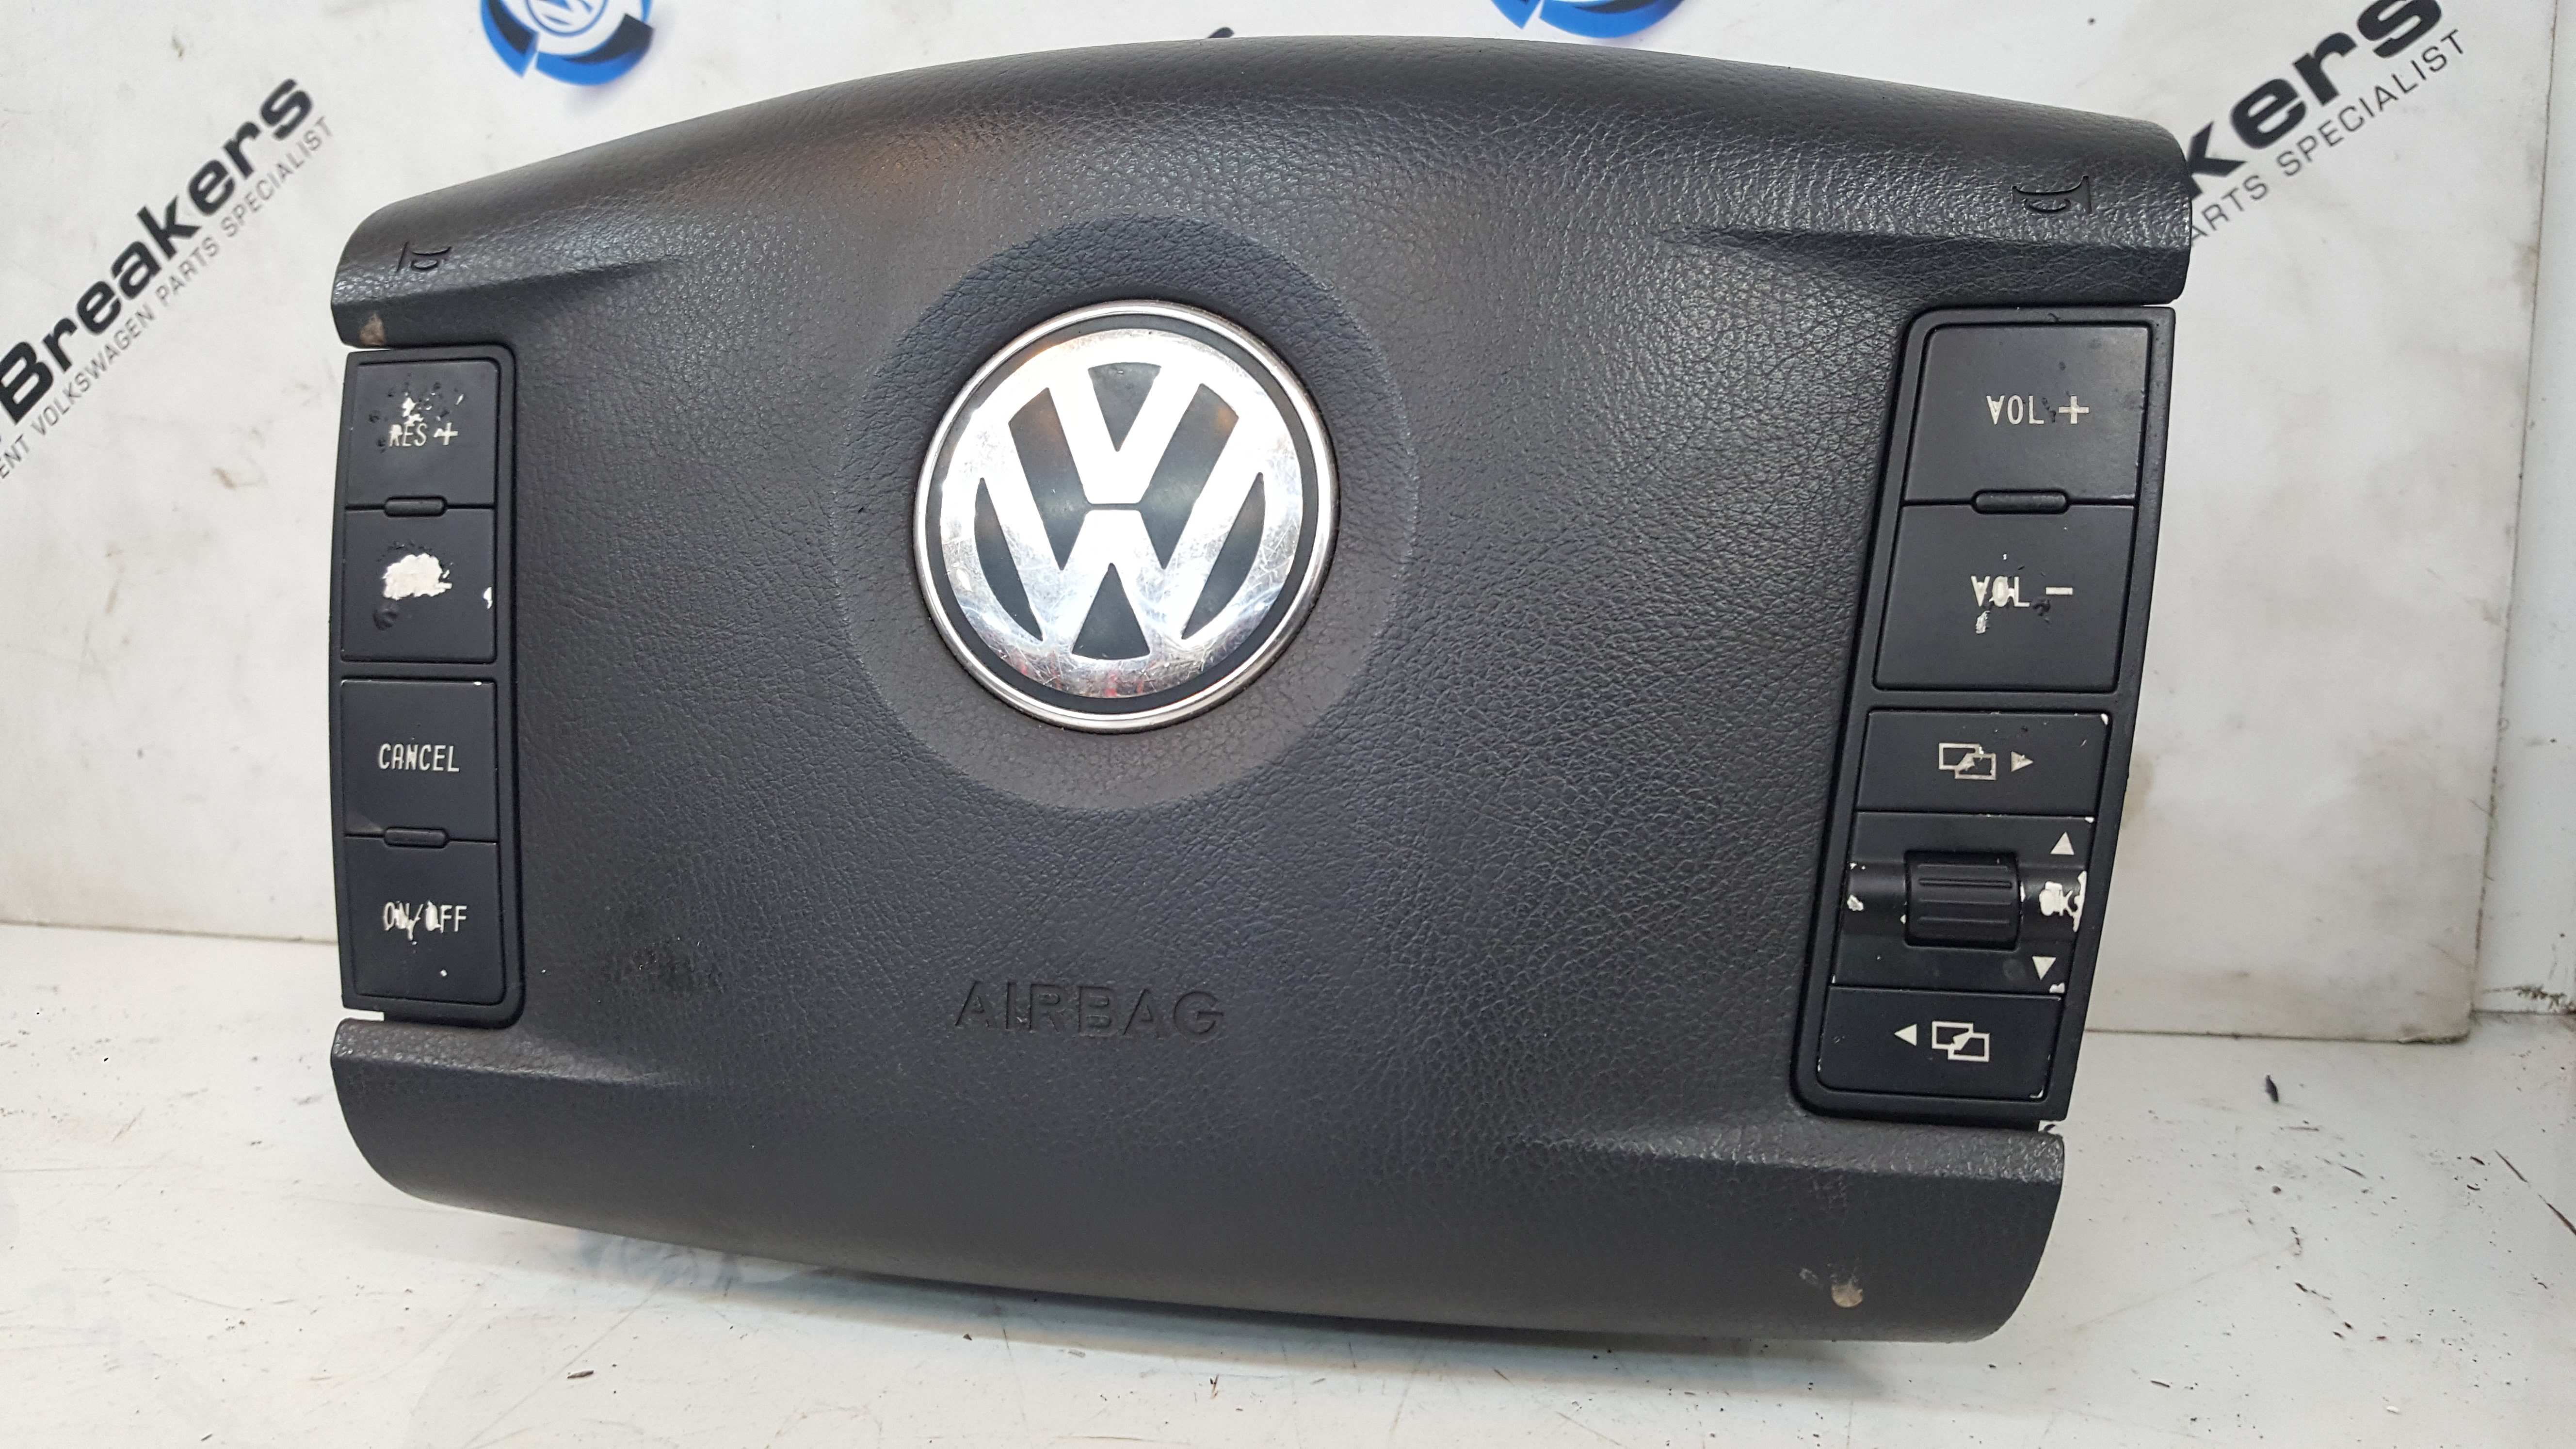 Volkswagen Touareg 2002-2007 Steering Wheel Air With Buttons 7l6880201cp